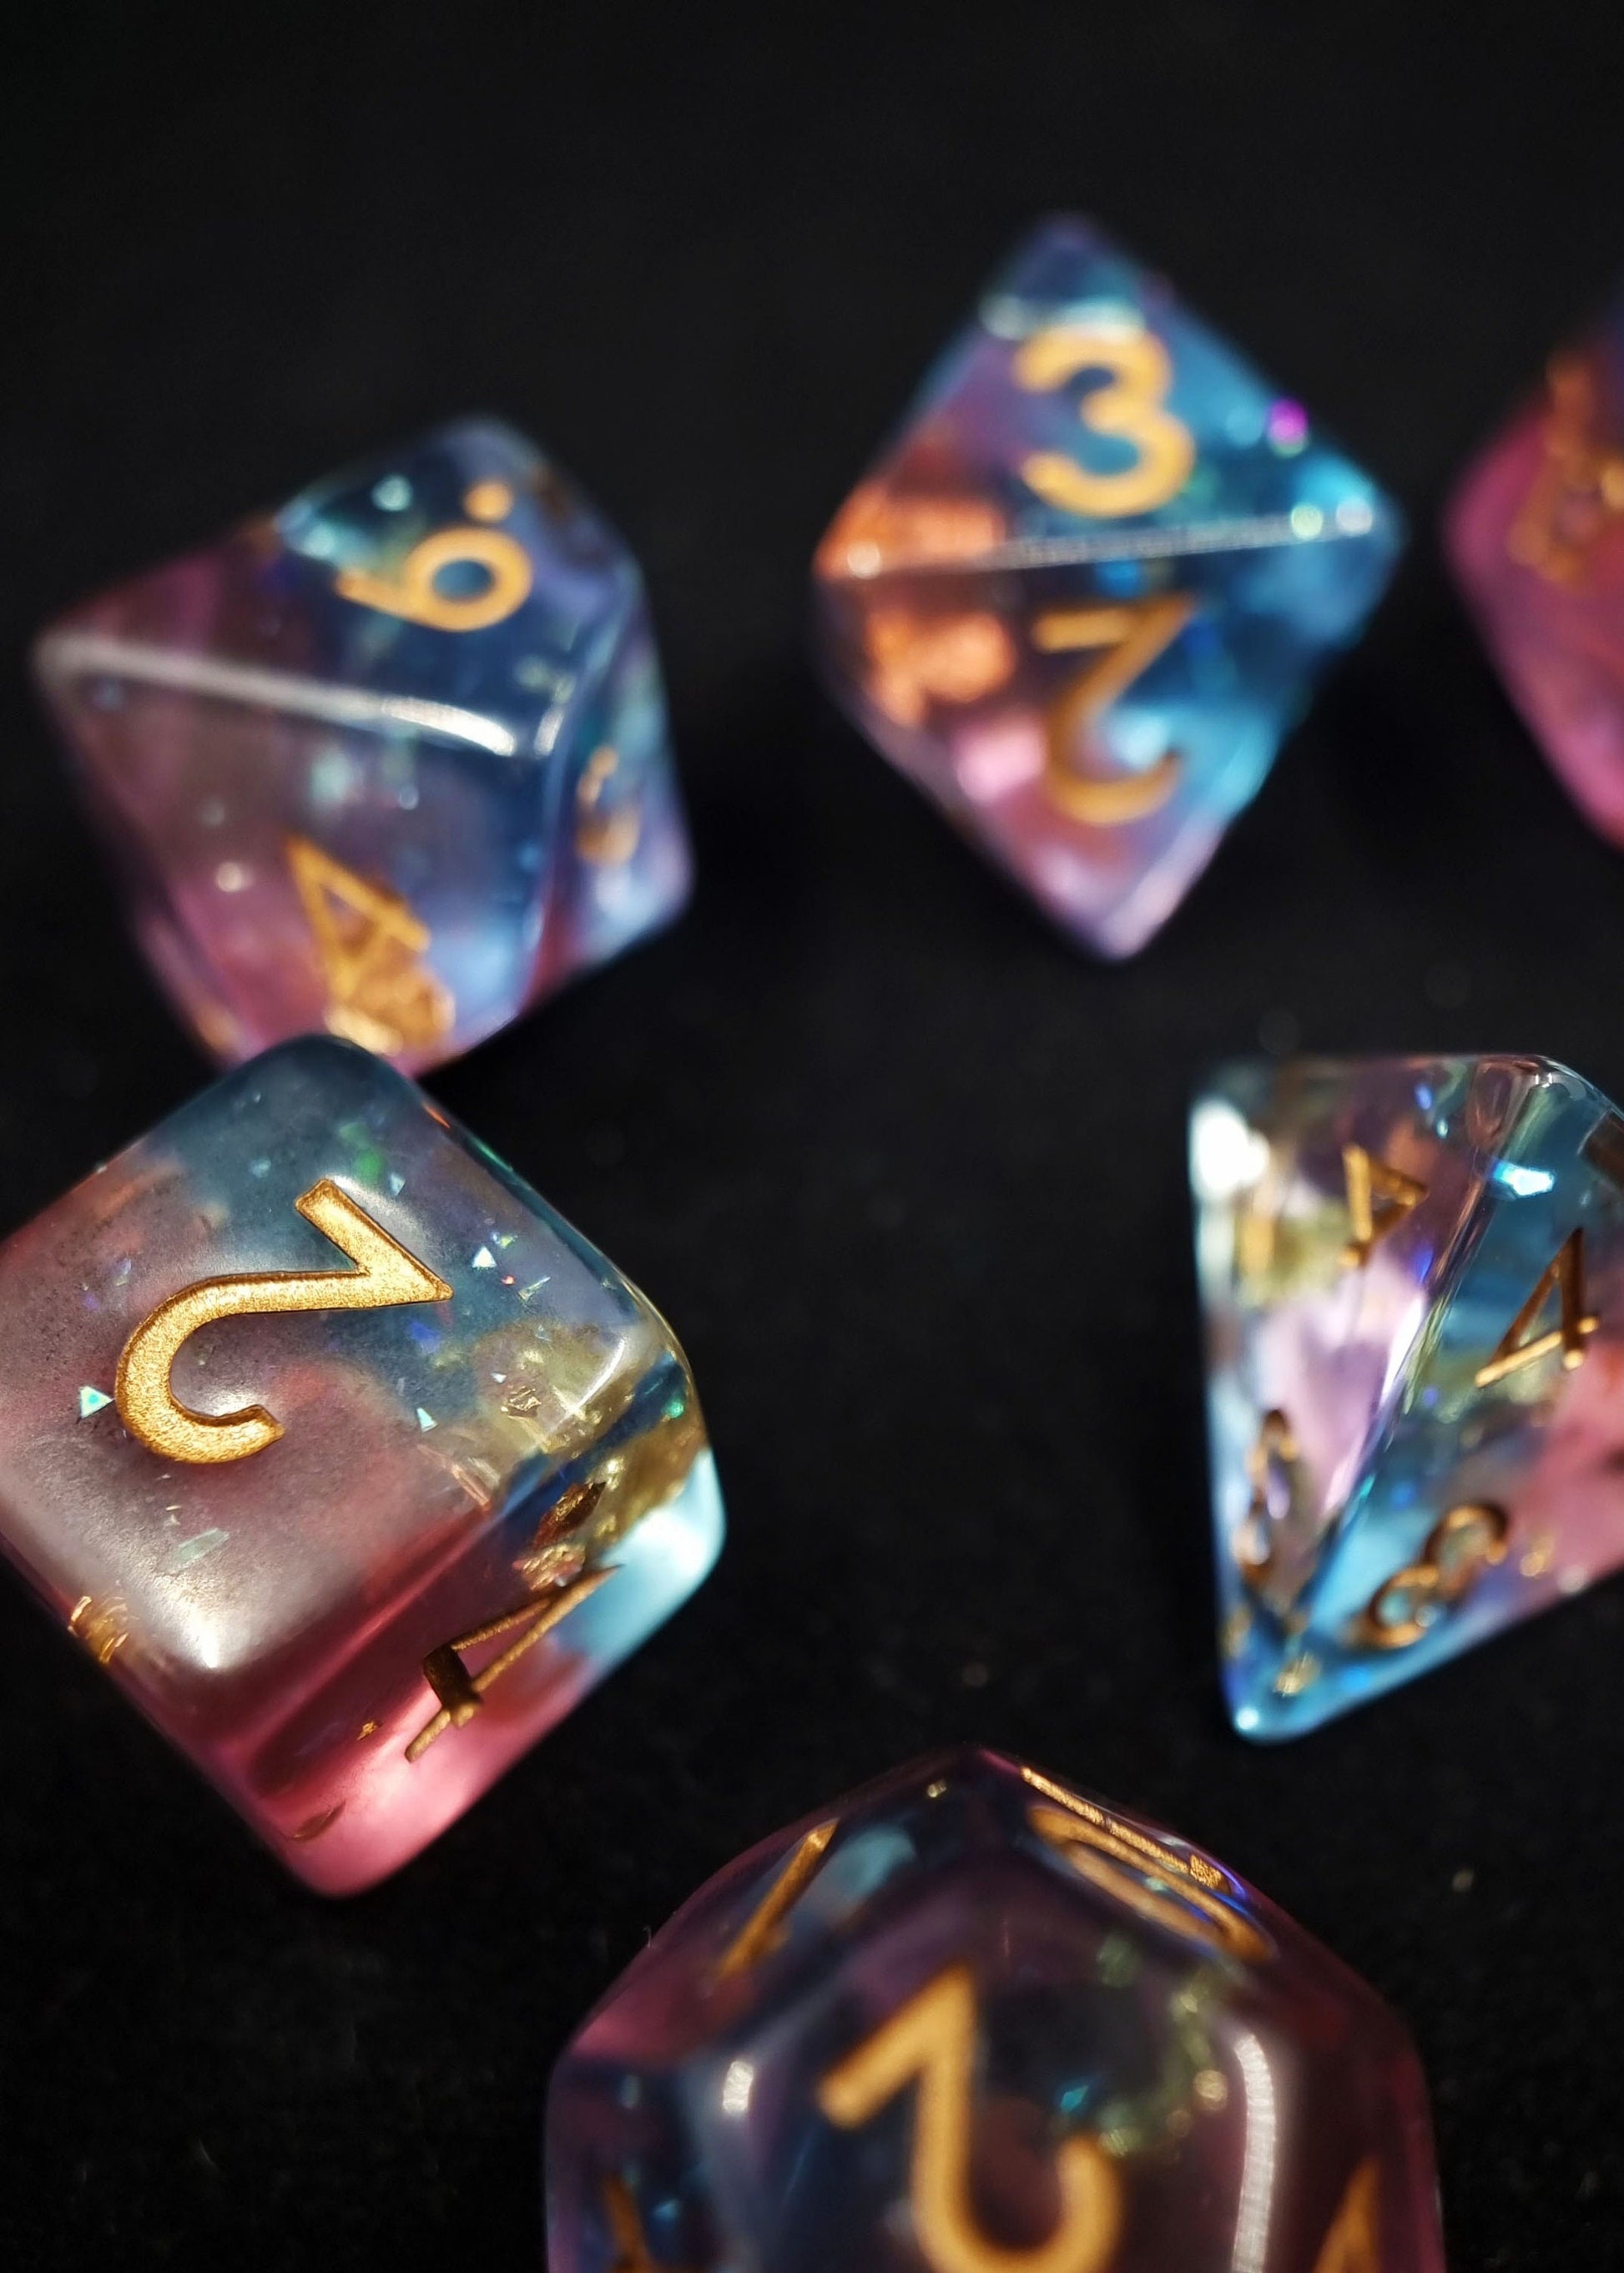 Stratosphere Polyhedral Dice Set - Transparent Layered Pale Red and Blue Dice with Reflect Glitter and Gold Flake